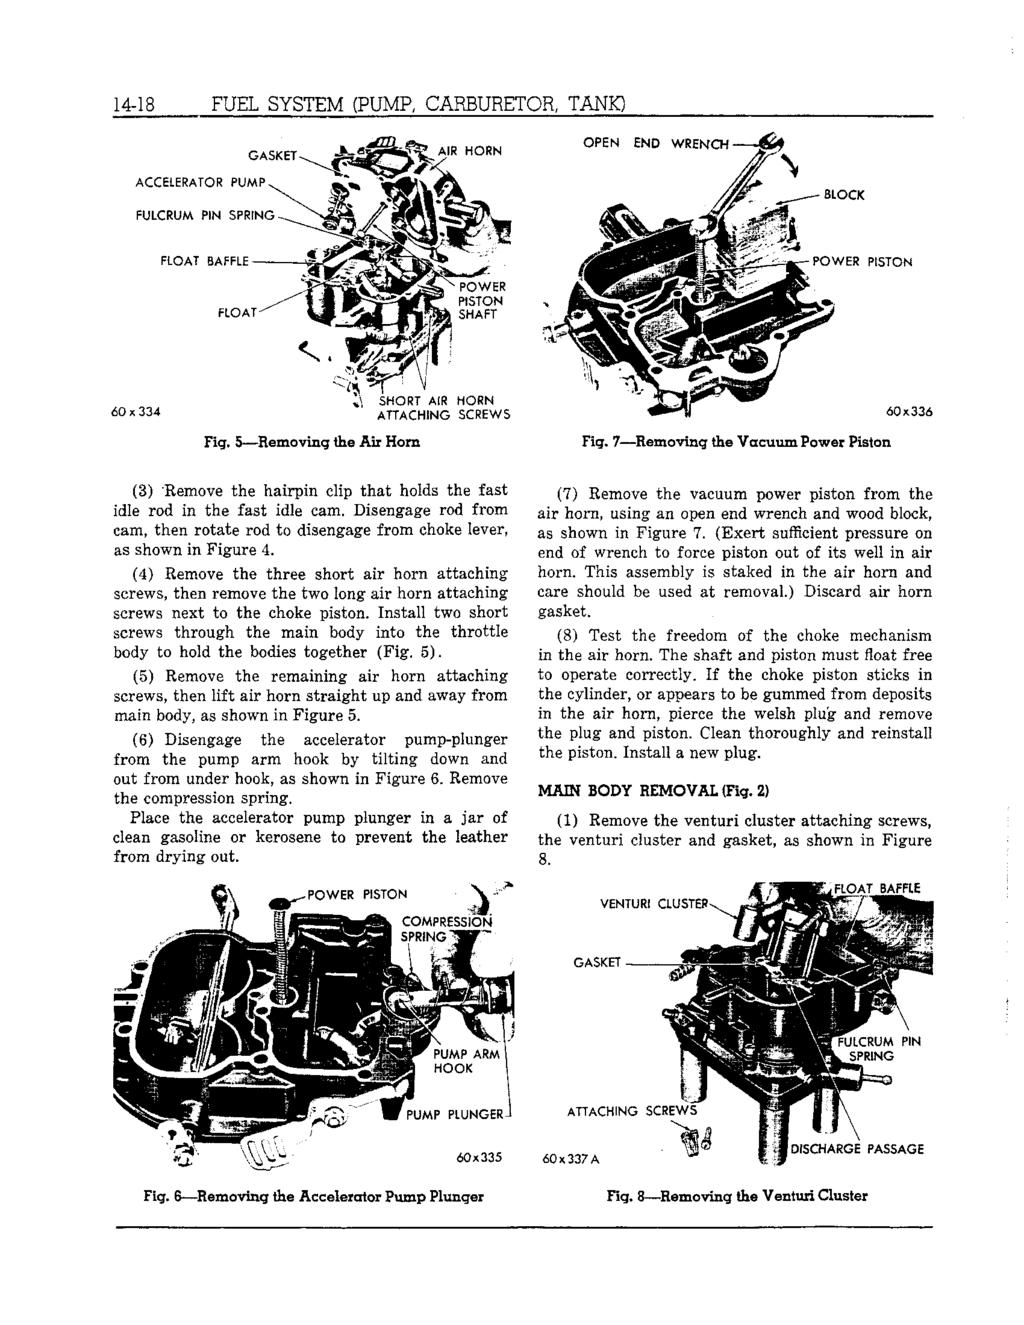 14-18 FUEL SYSTEM (PUMP, CARBURETOR, TANK) 60 x Fig. 5 Removing the Air Horn Fig. 7 Removing the Vacuum Power Piston (3) "Remove the hairpin clip that holds the fast idle rod in the fast idle cam.